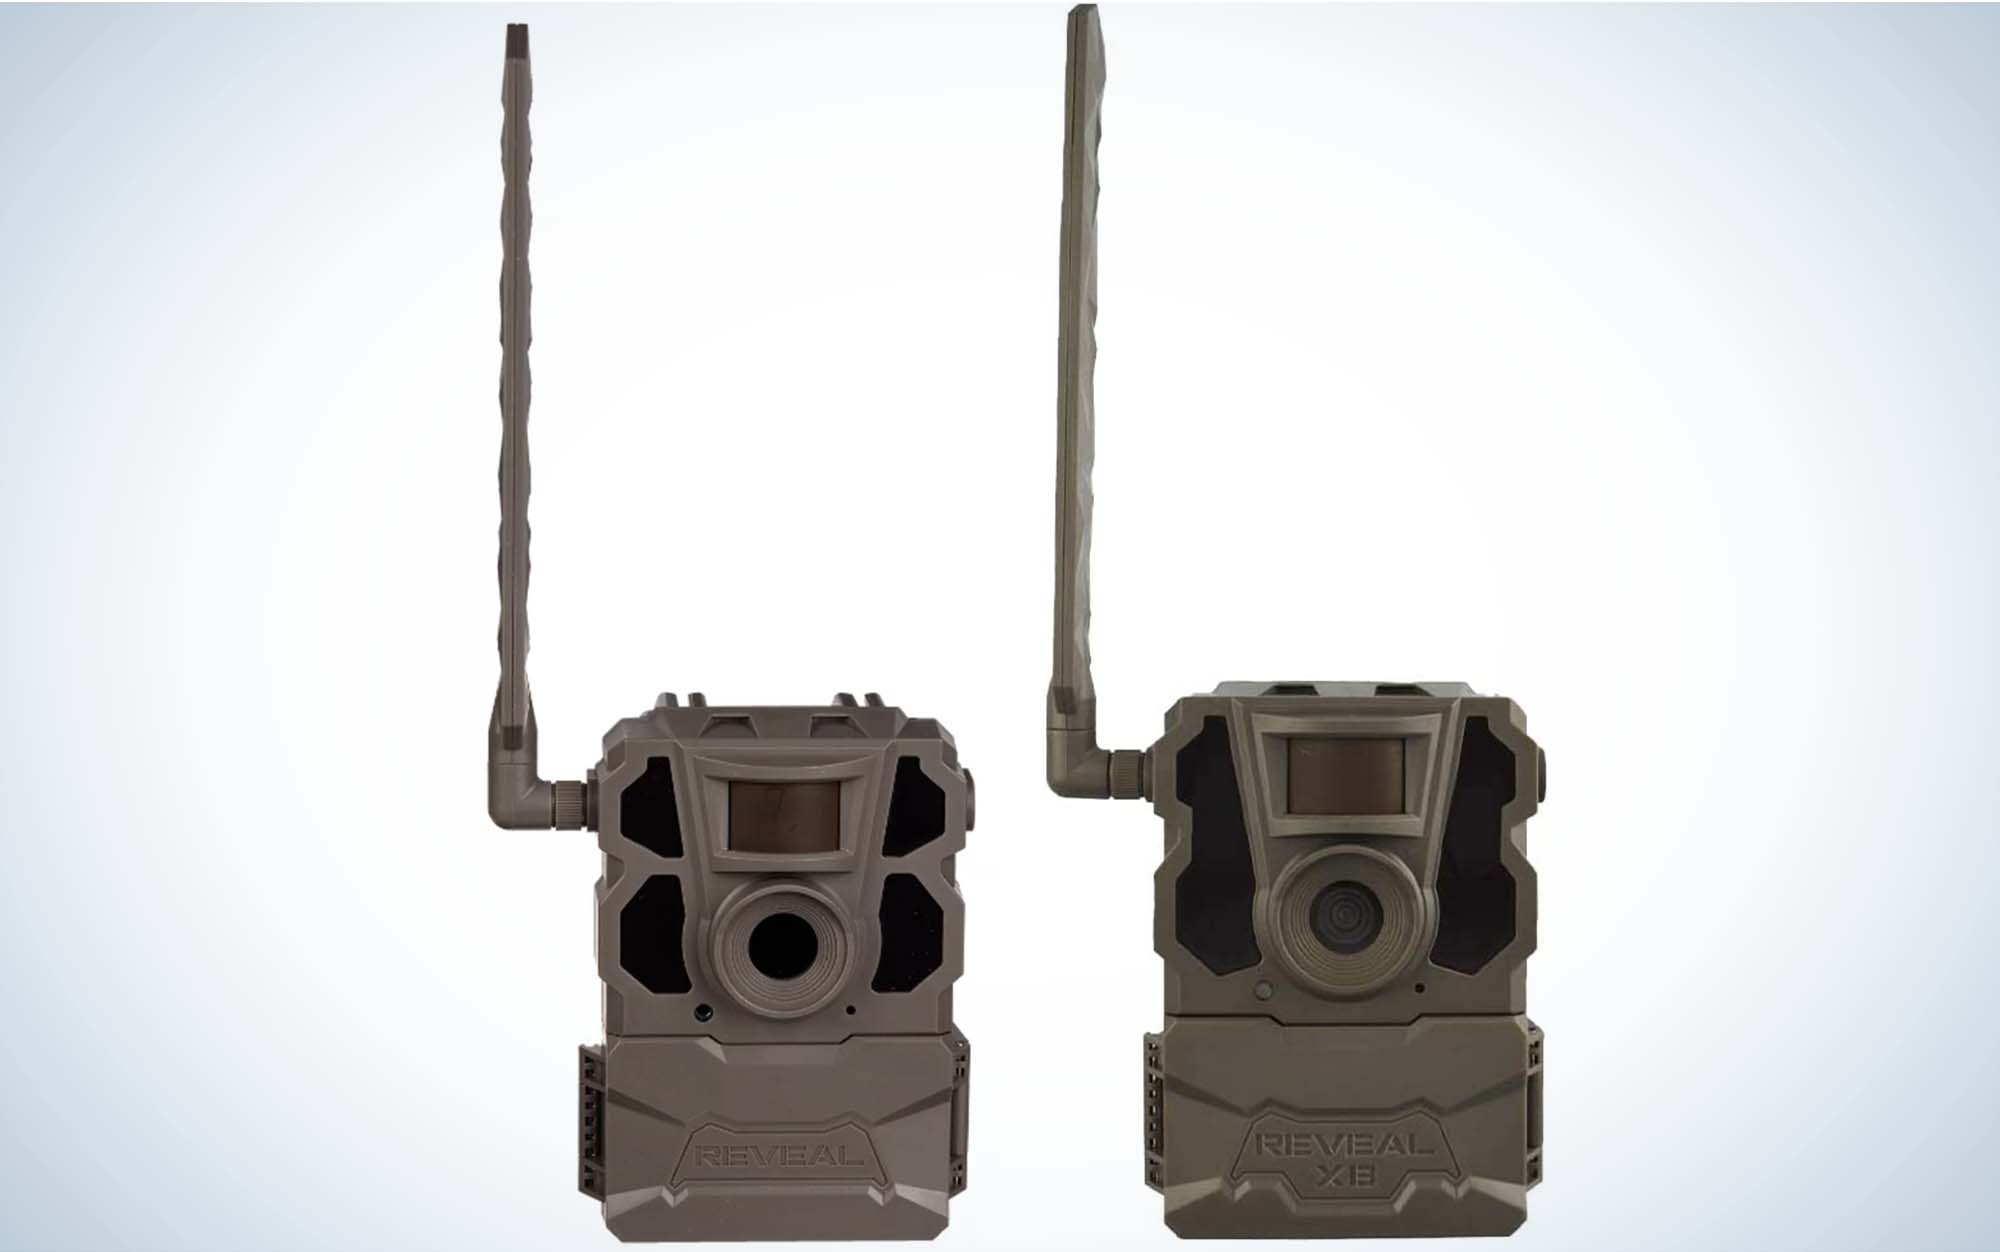 The Tactacam Reveal X and XB are waterproof.